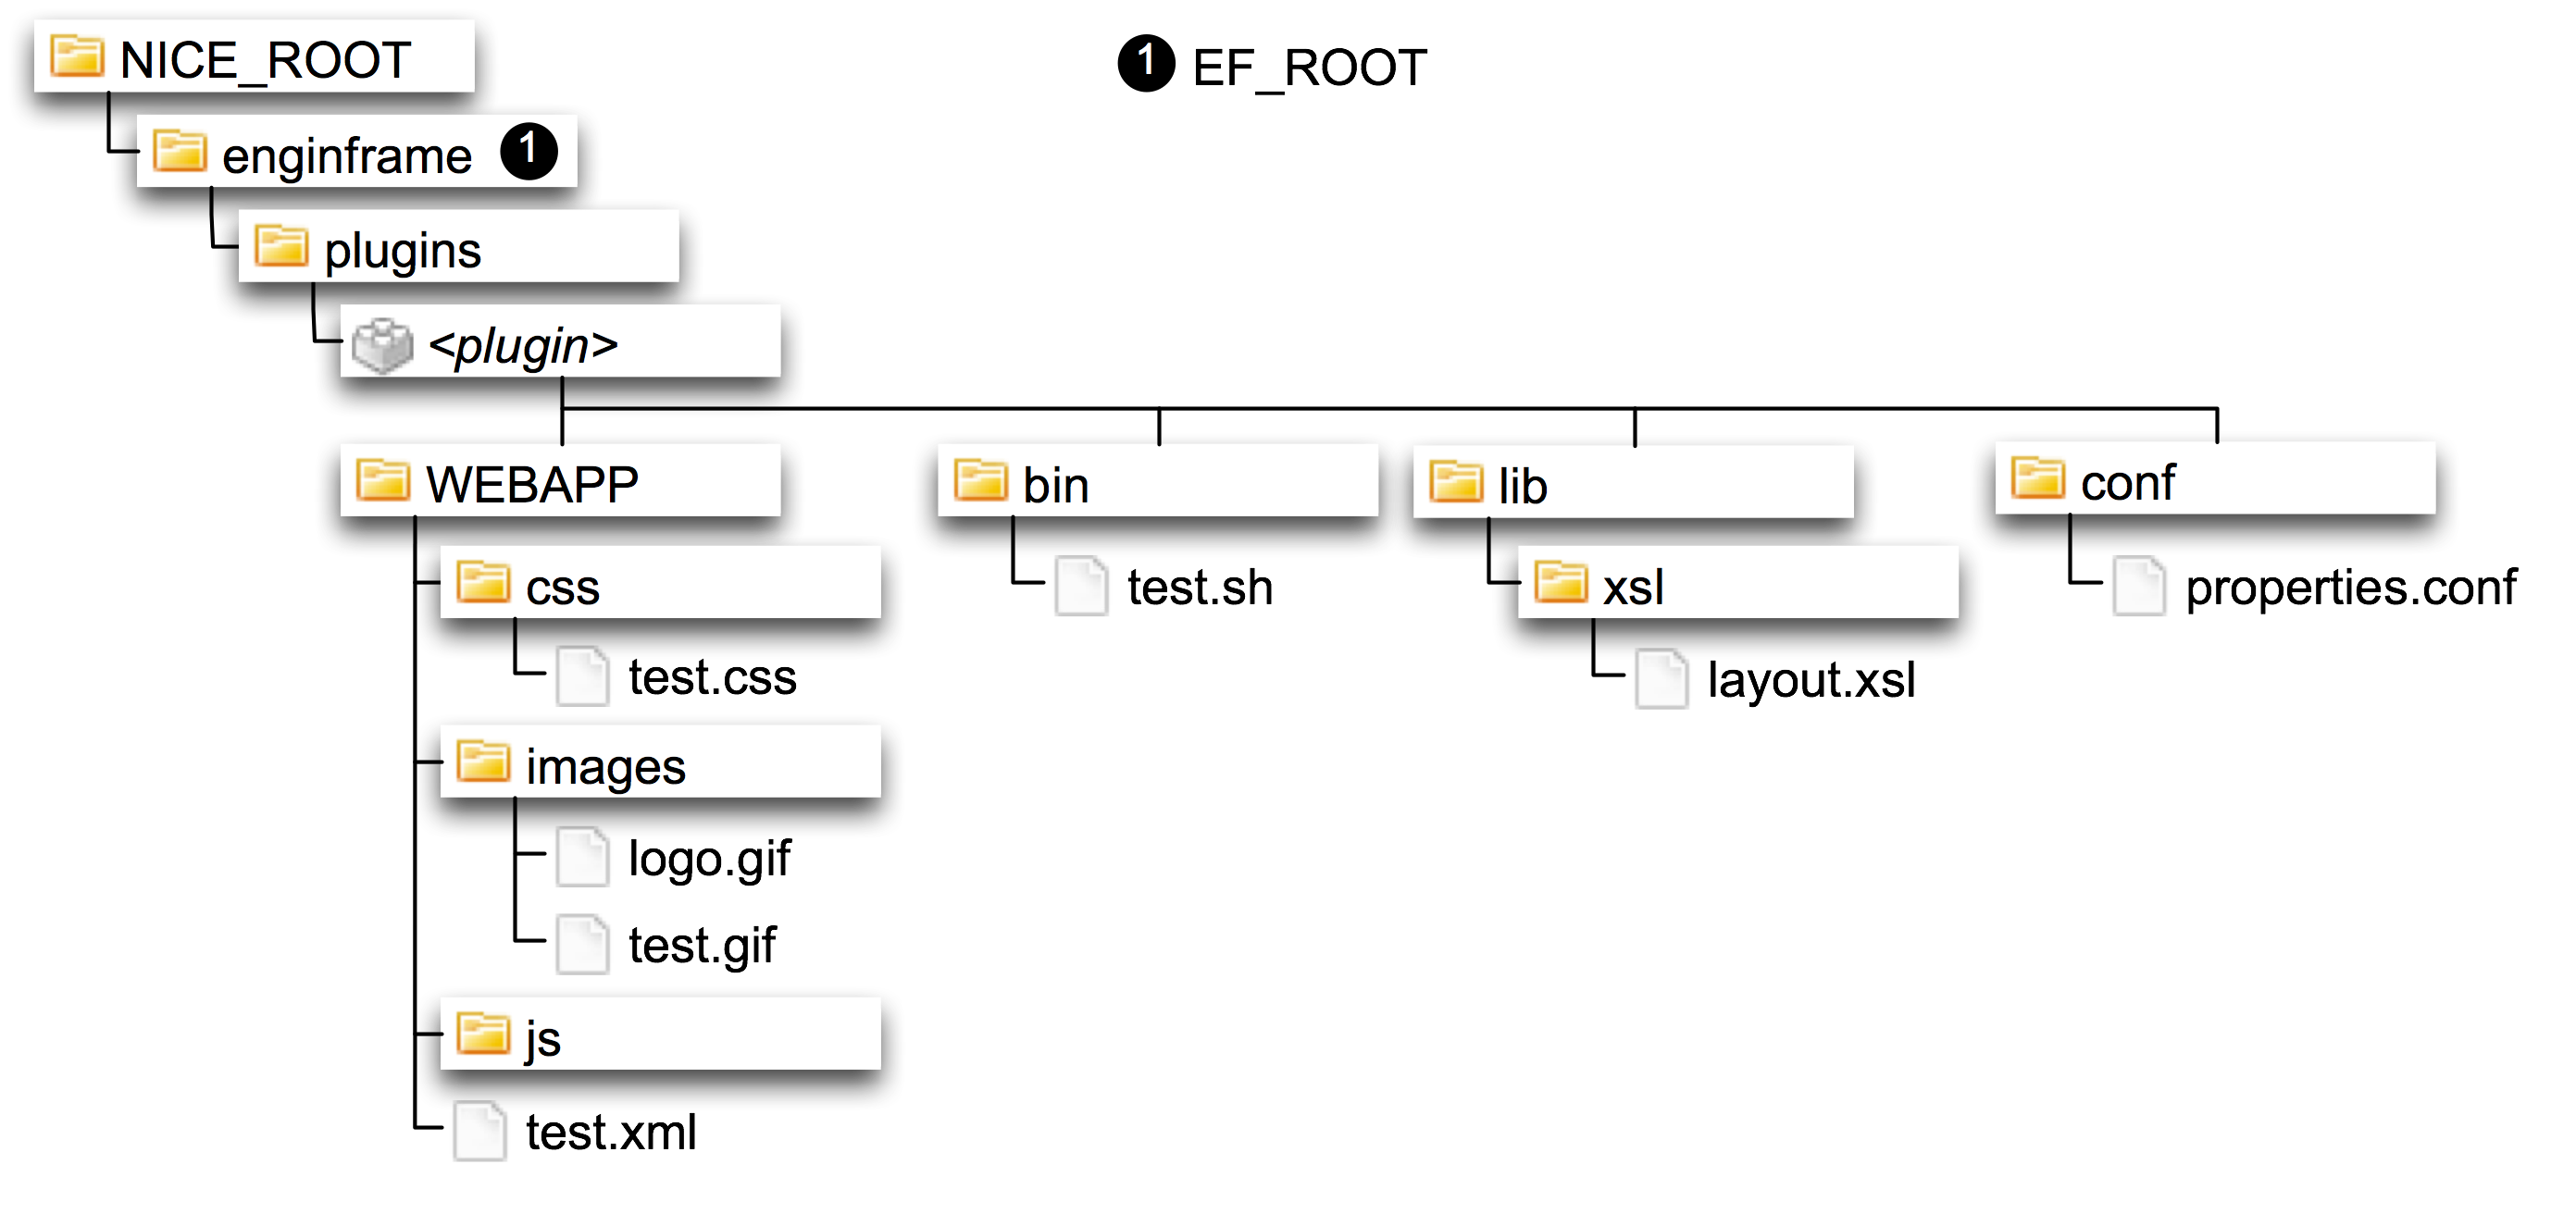 Shows a graphical representation of the directory structure of EF_ROOT.